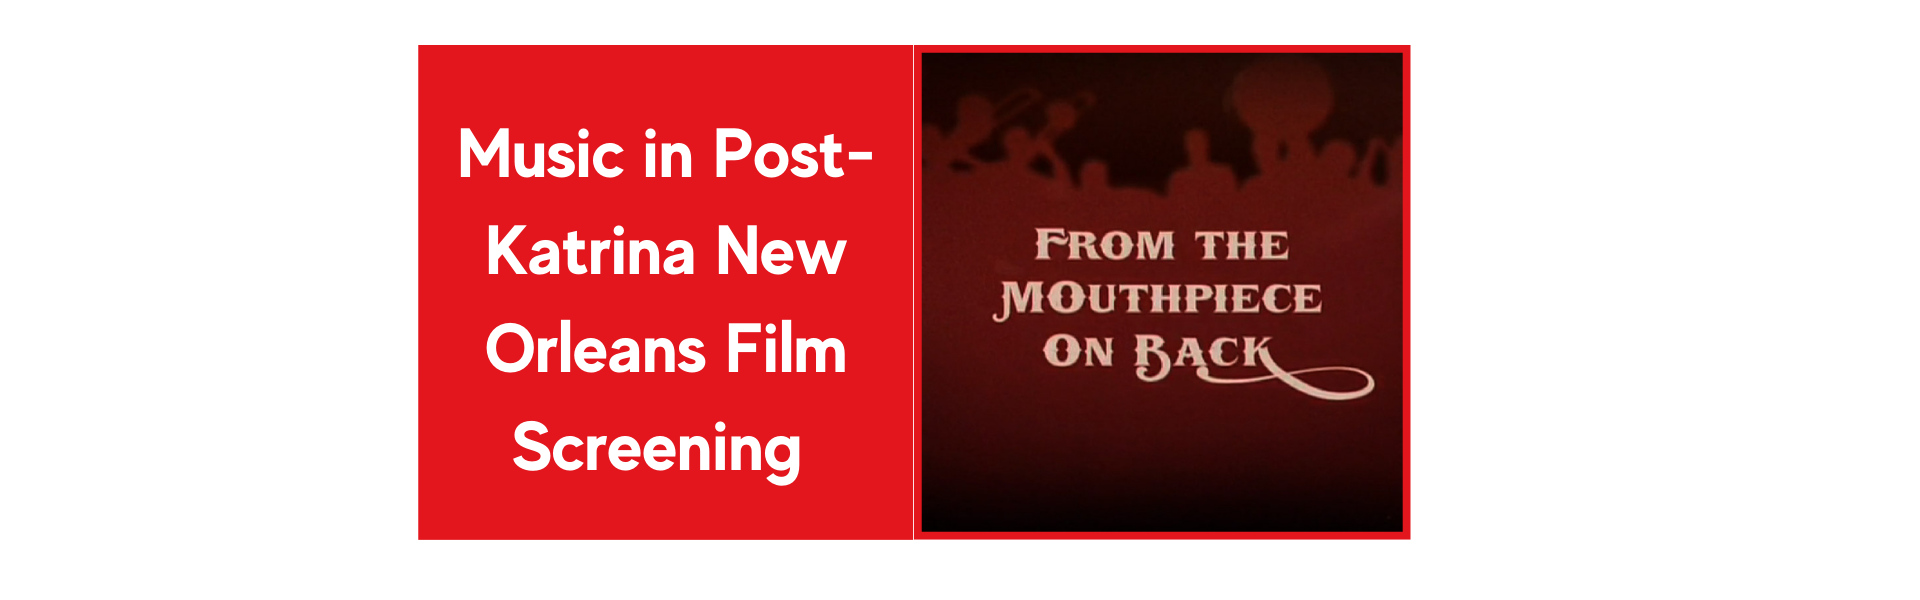 Music-in-Post-Katrina-New-Orleans-Film-Screening.png